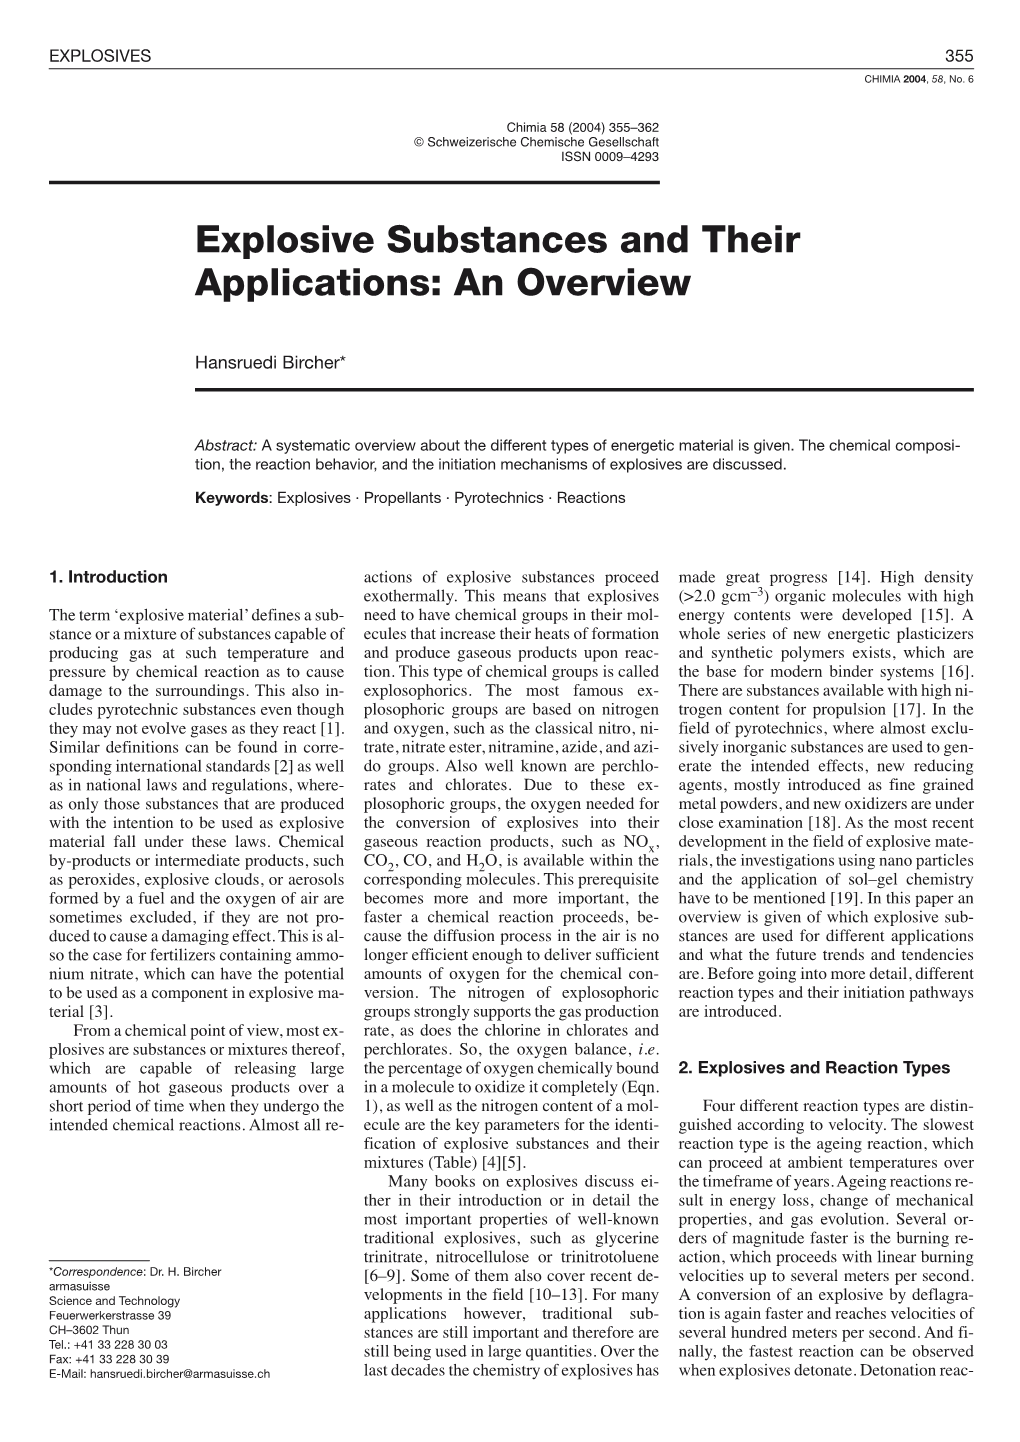 Explosive Substances and Their Applications: an Overview